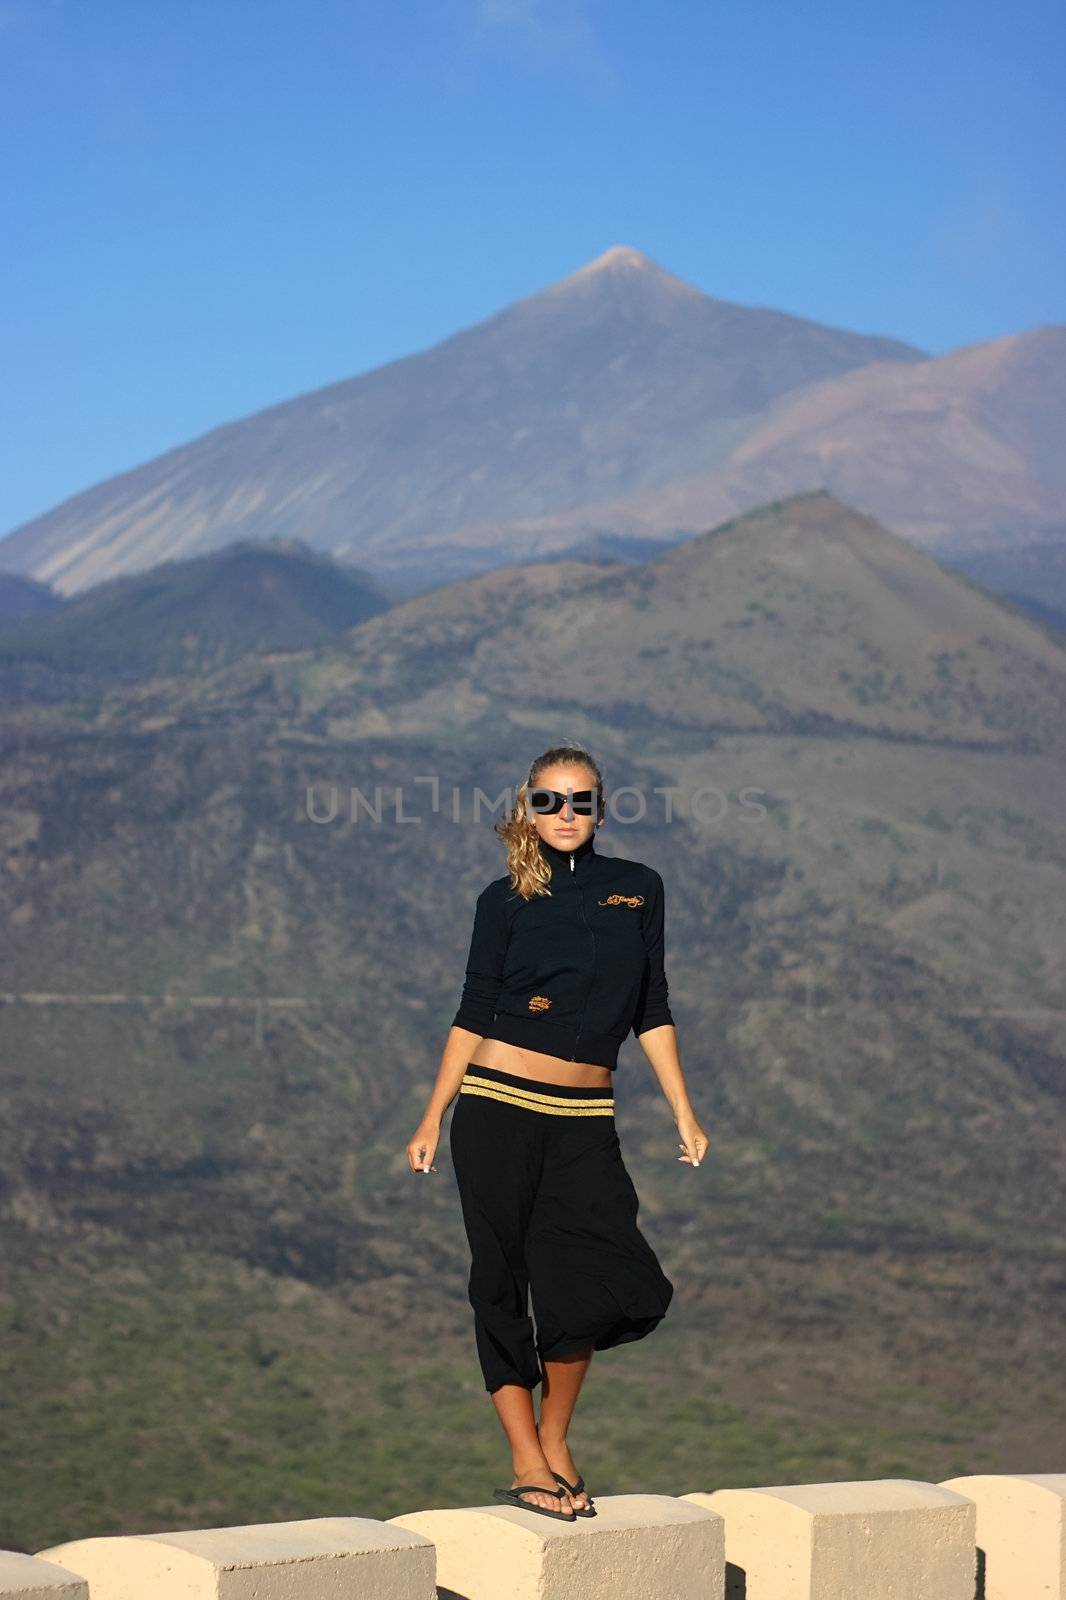 Yound lady in sunglasses and volcano on the background